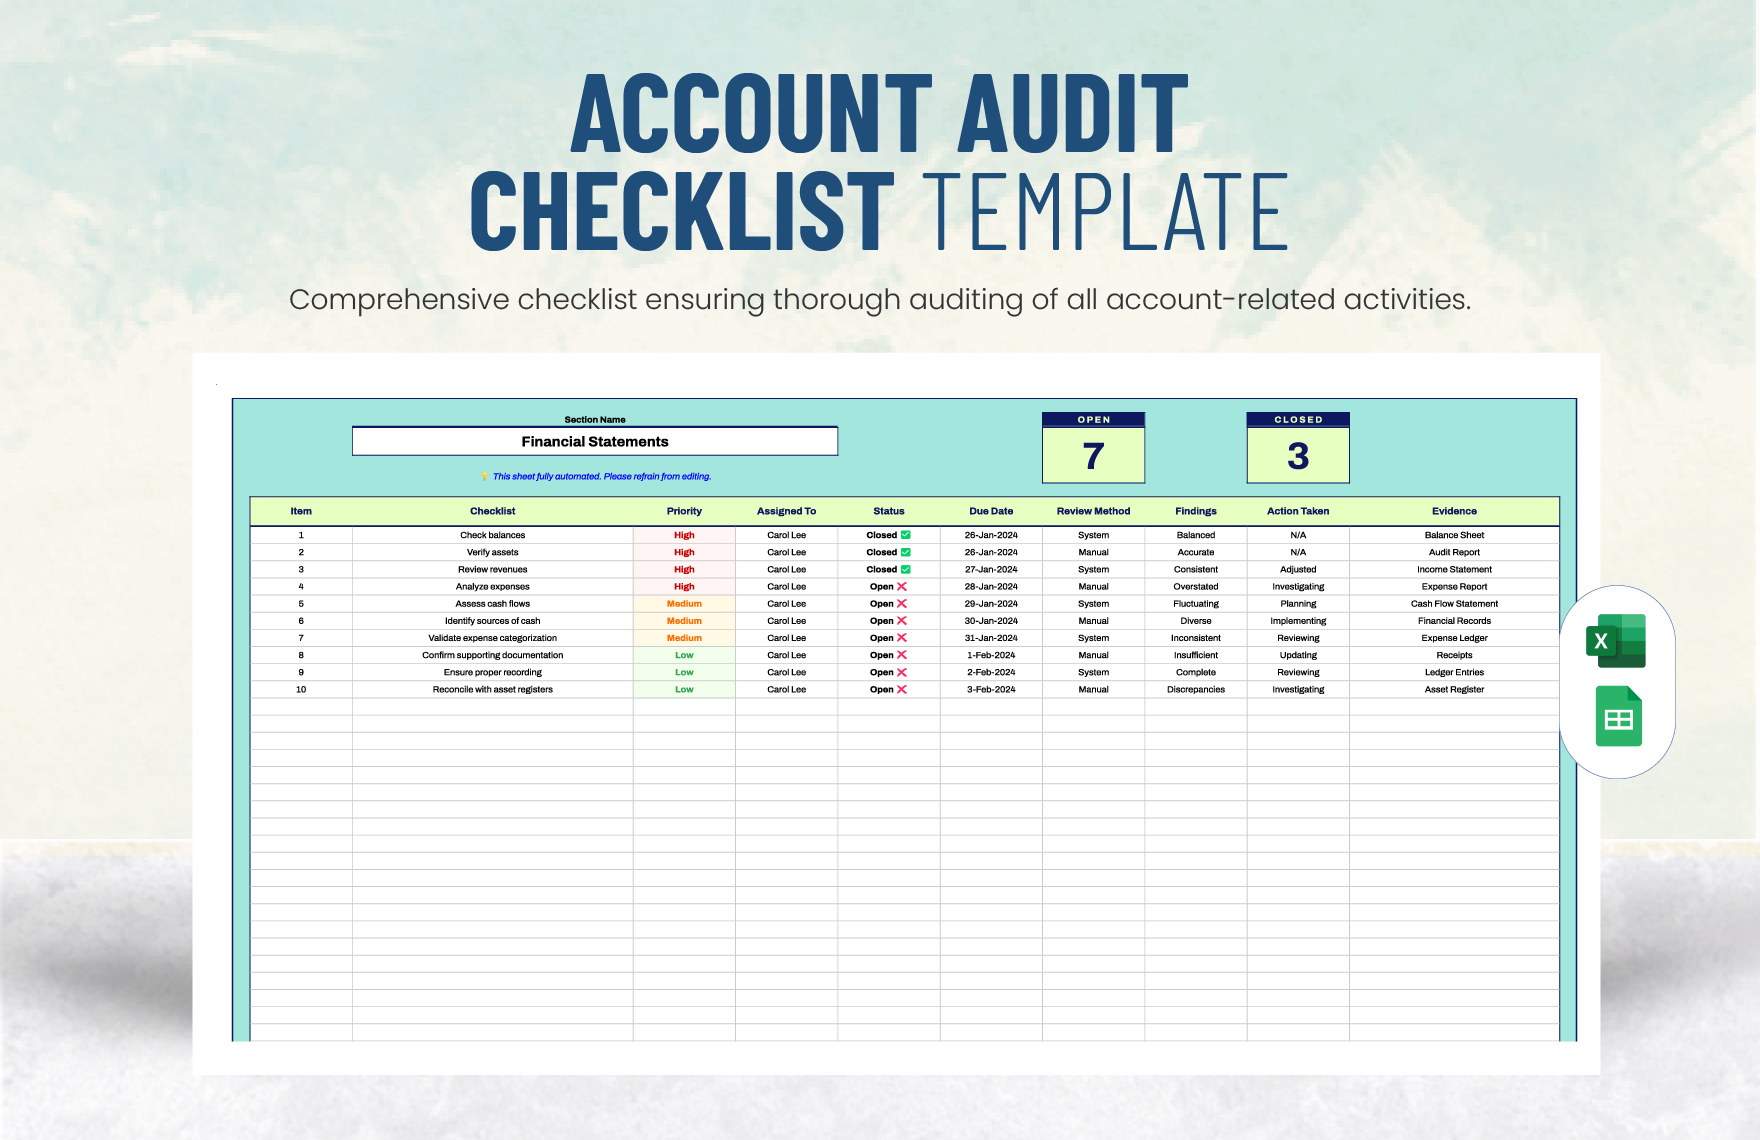 Account Audit Checklist Template in Excel, Google Sheets